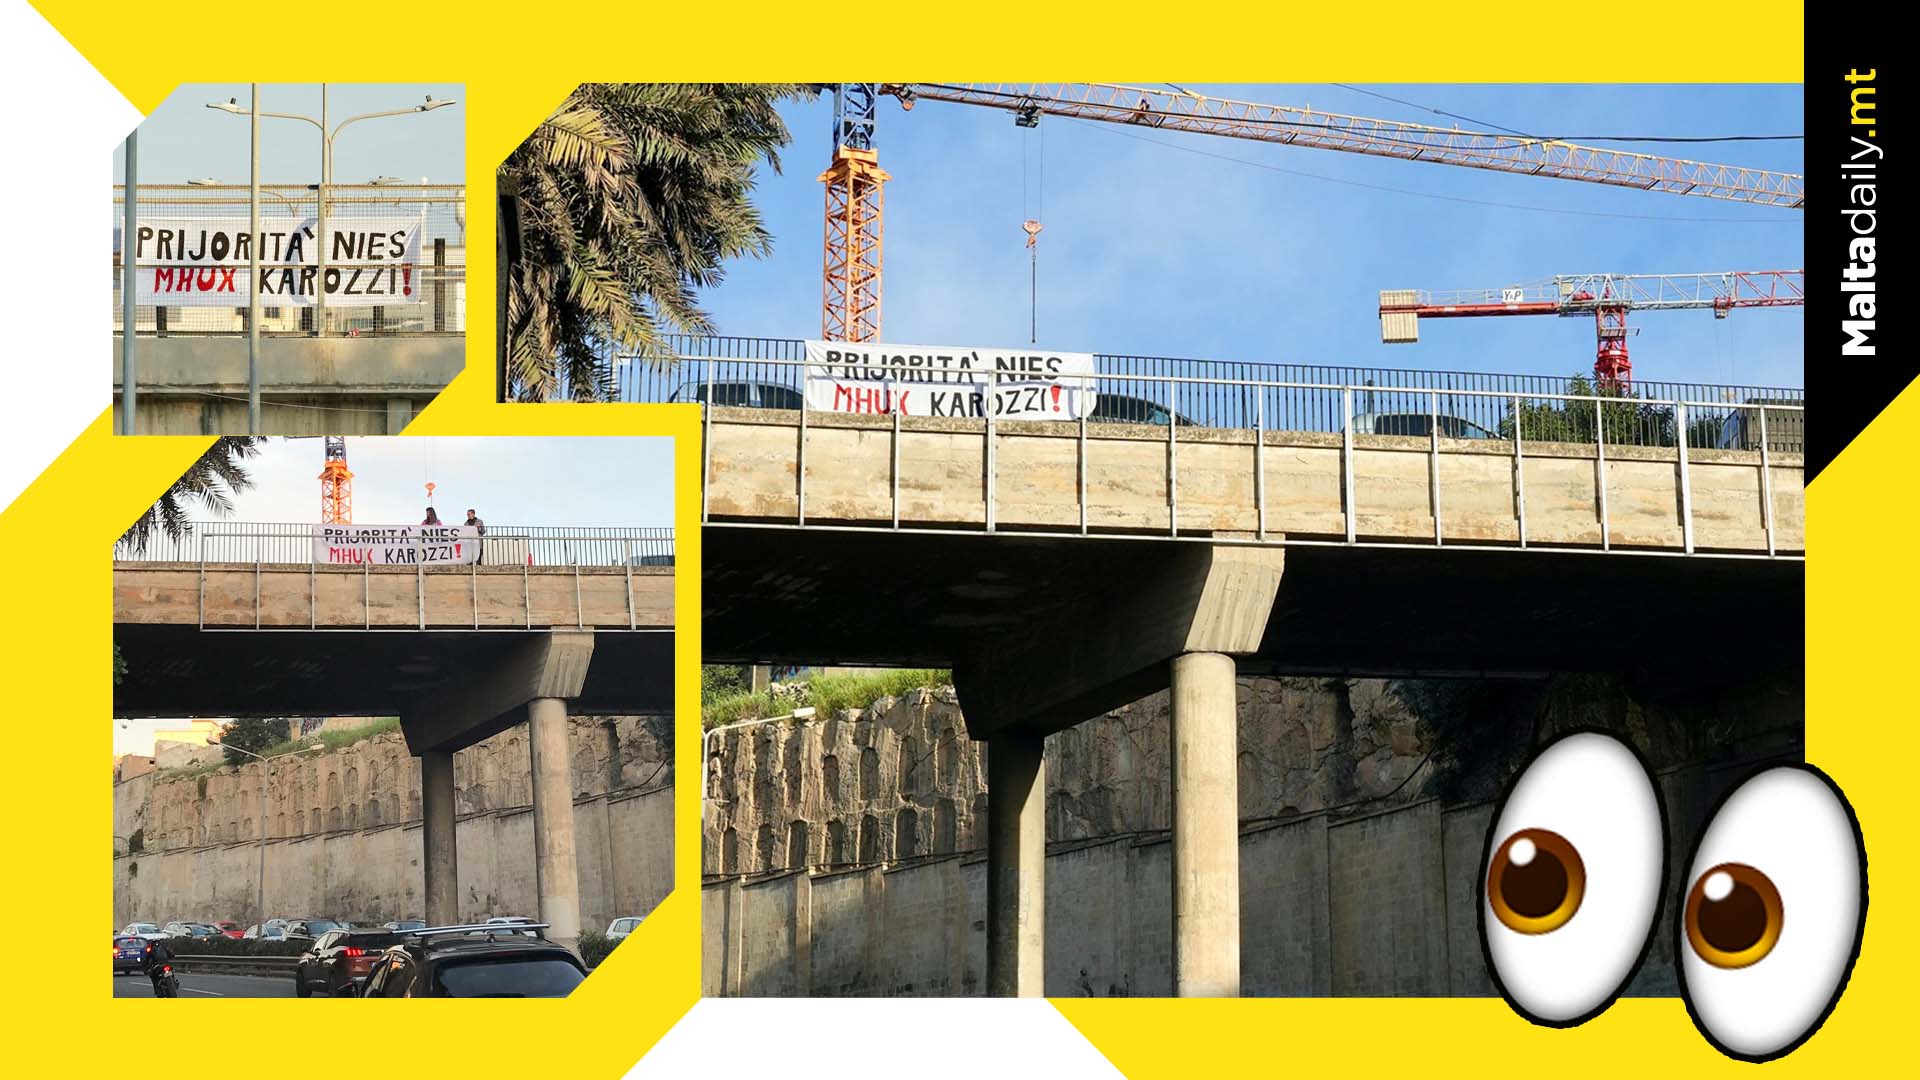 Anti-traffic banners hung off bridges by activists